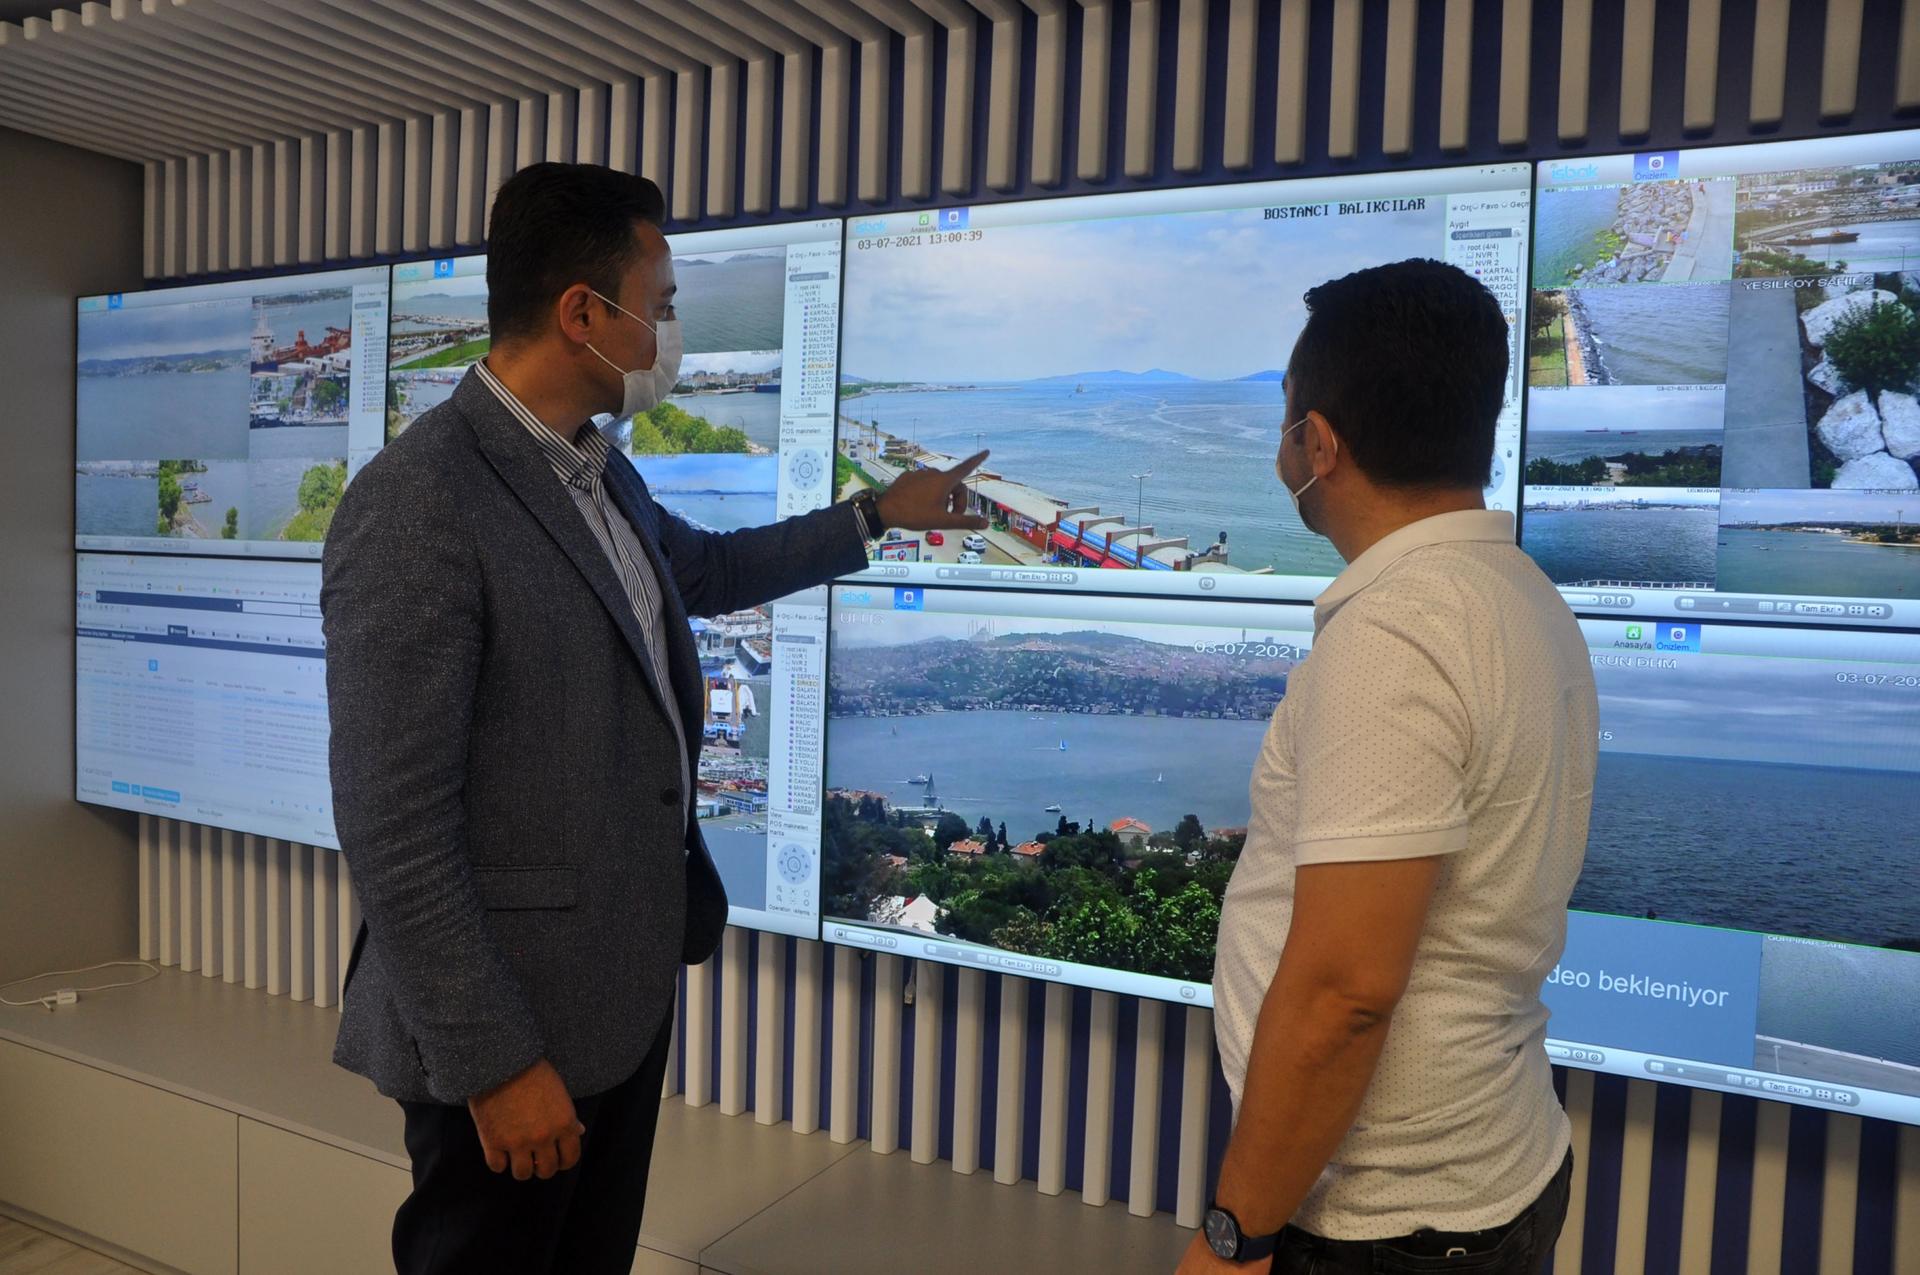 İlker Aslan (left) and Fatih Polat Timur identify a patch of sea snot near the district of Kadiköy, off Istanbul’s beach. The setup of monitors was designed by Timur to monitor litter and other pollutants emitted by ship traffic. Tips are radioed into the